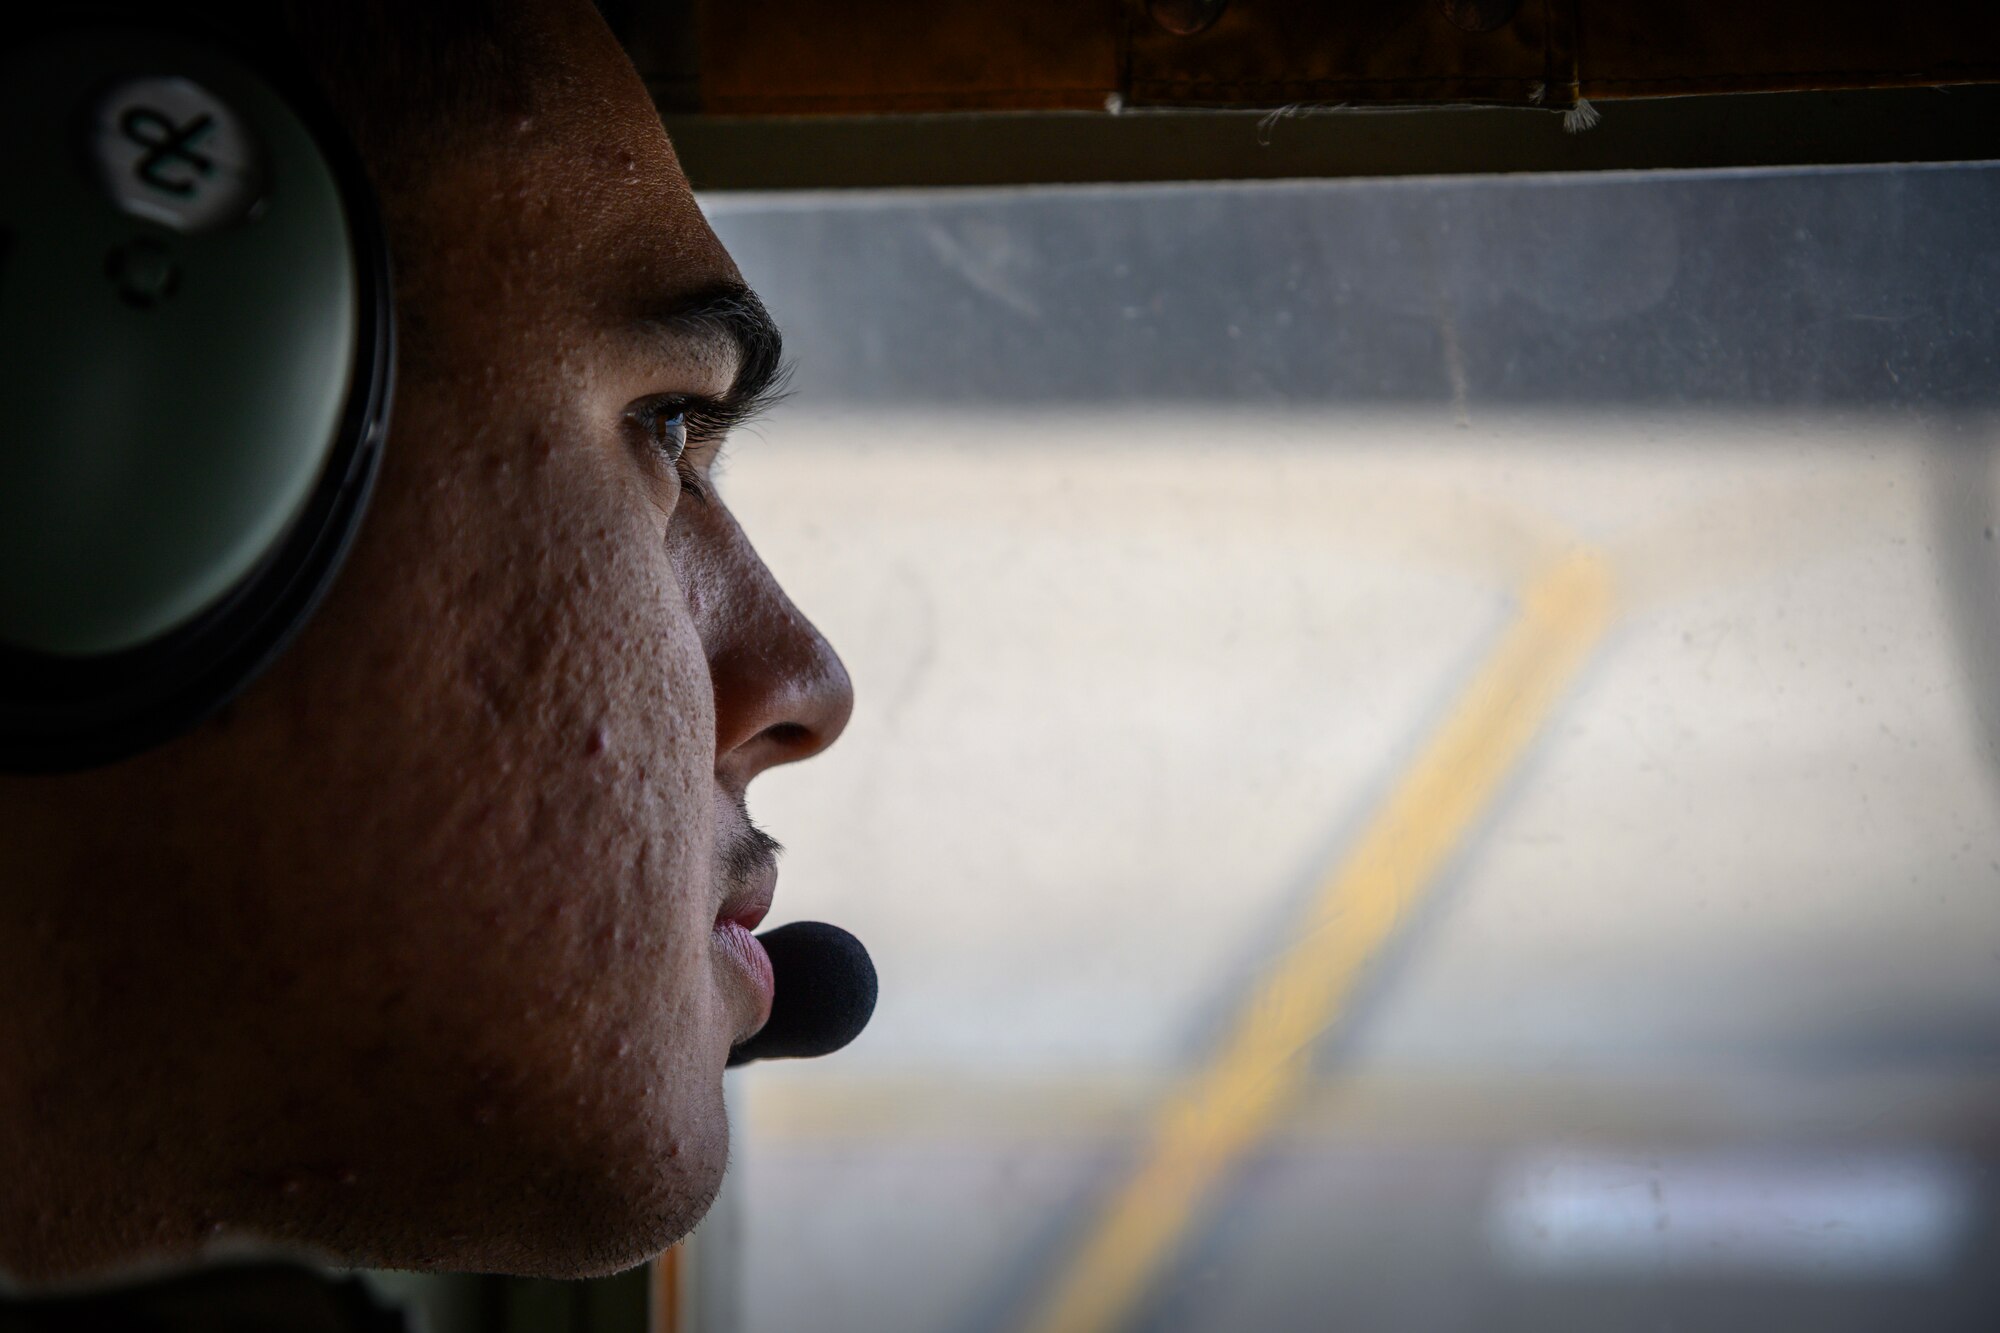 A U.S. Airman with the 1st Special Operations Squadron from Kadena Air Base, Japan, observes forward area refueling point (FARP) training from inside a U.S. Air Force MC-130J at Misawa Air Base, Japan, Nov. 18, 2020. When a fighter squadron has FARP support, options are vastly increased, as any accessible airfield or island can be used to replenish fighters and send them back to the fight. (U.S. Air Force photo by Airman 1st Class China M. Shock)